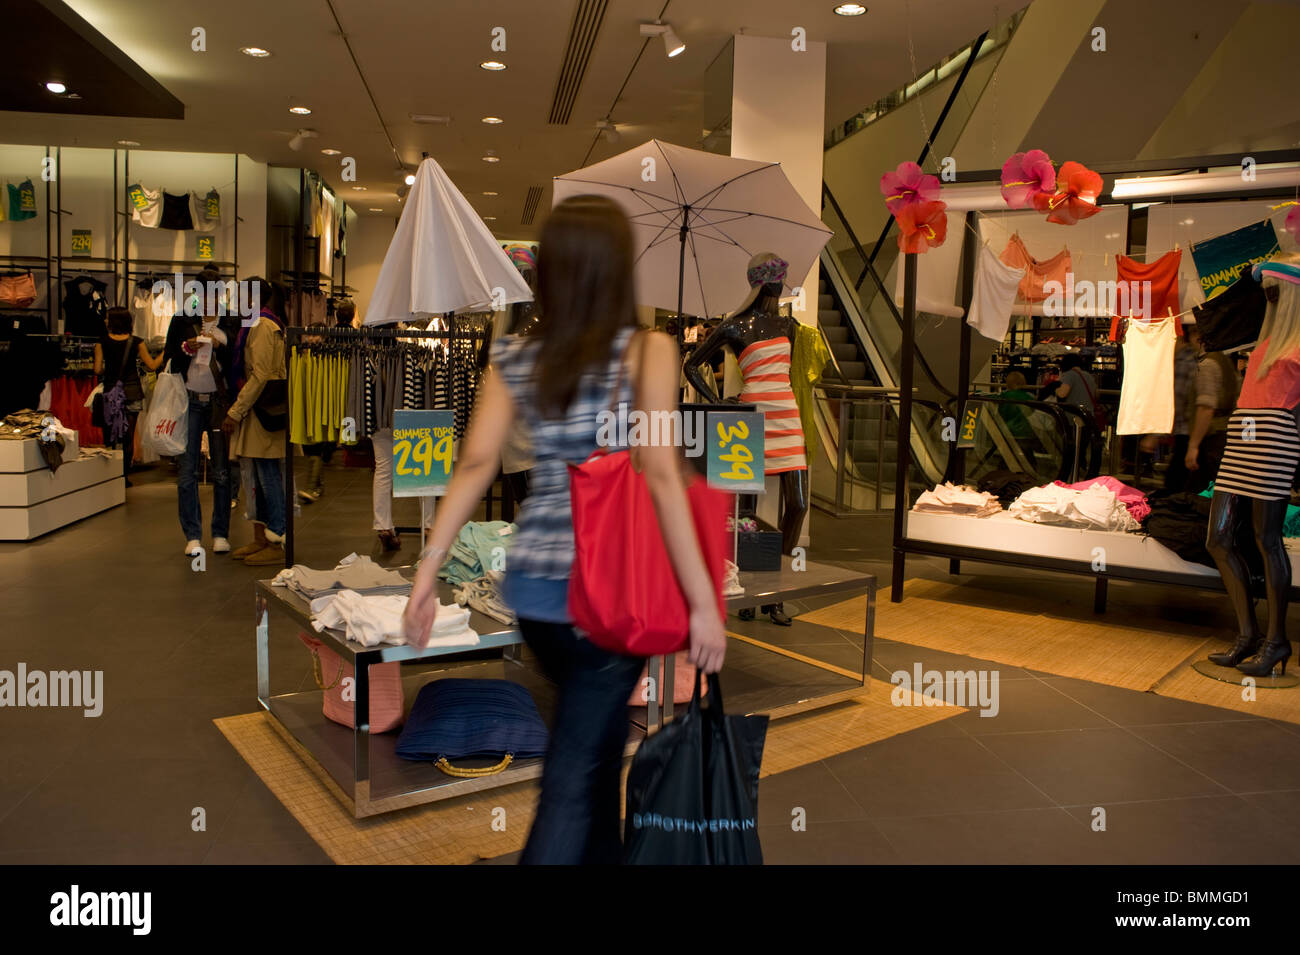 People Clothes Shopping in Aldo Clothing Store on Oxford St, London, UK  Stock Photo - Alamy